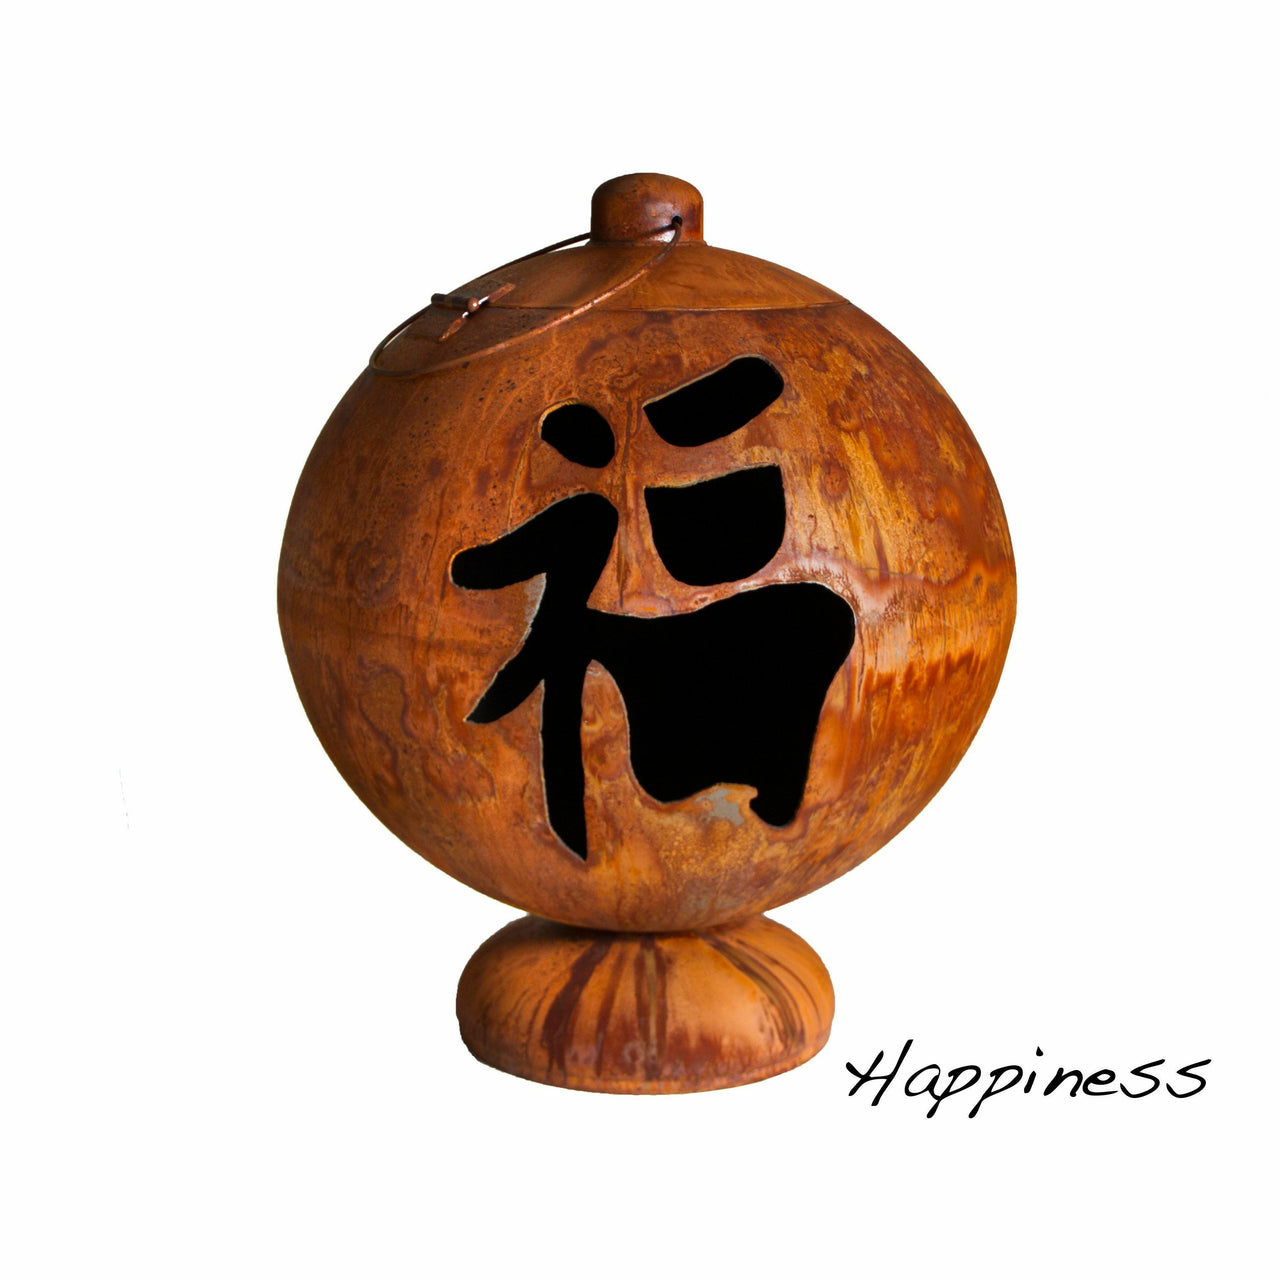 Ohio Flame Fire Globe "Peace, Happiness, Tranquility" - Fire Pit Stock